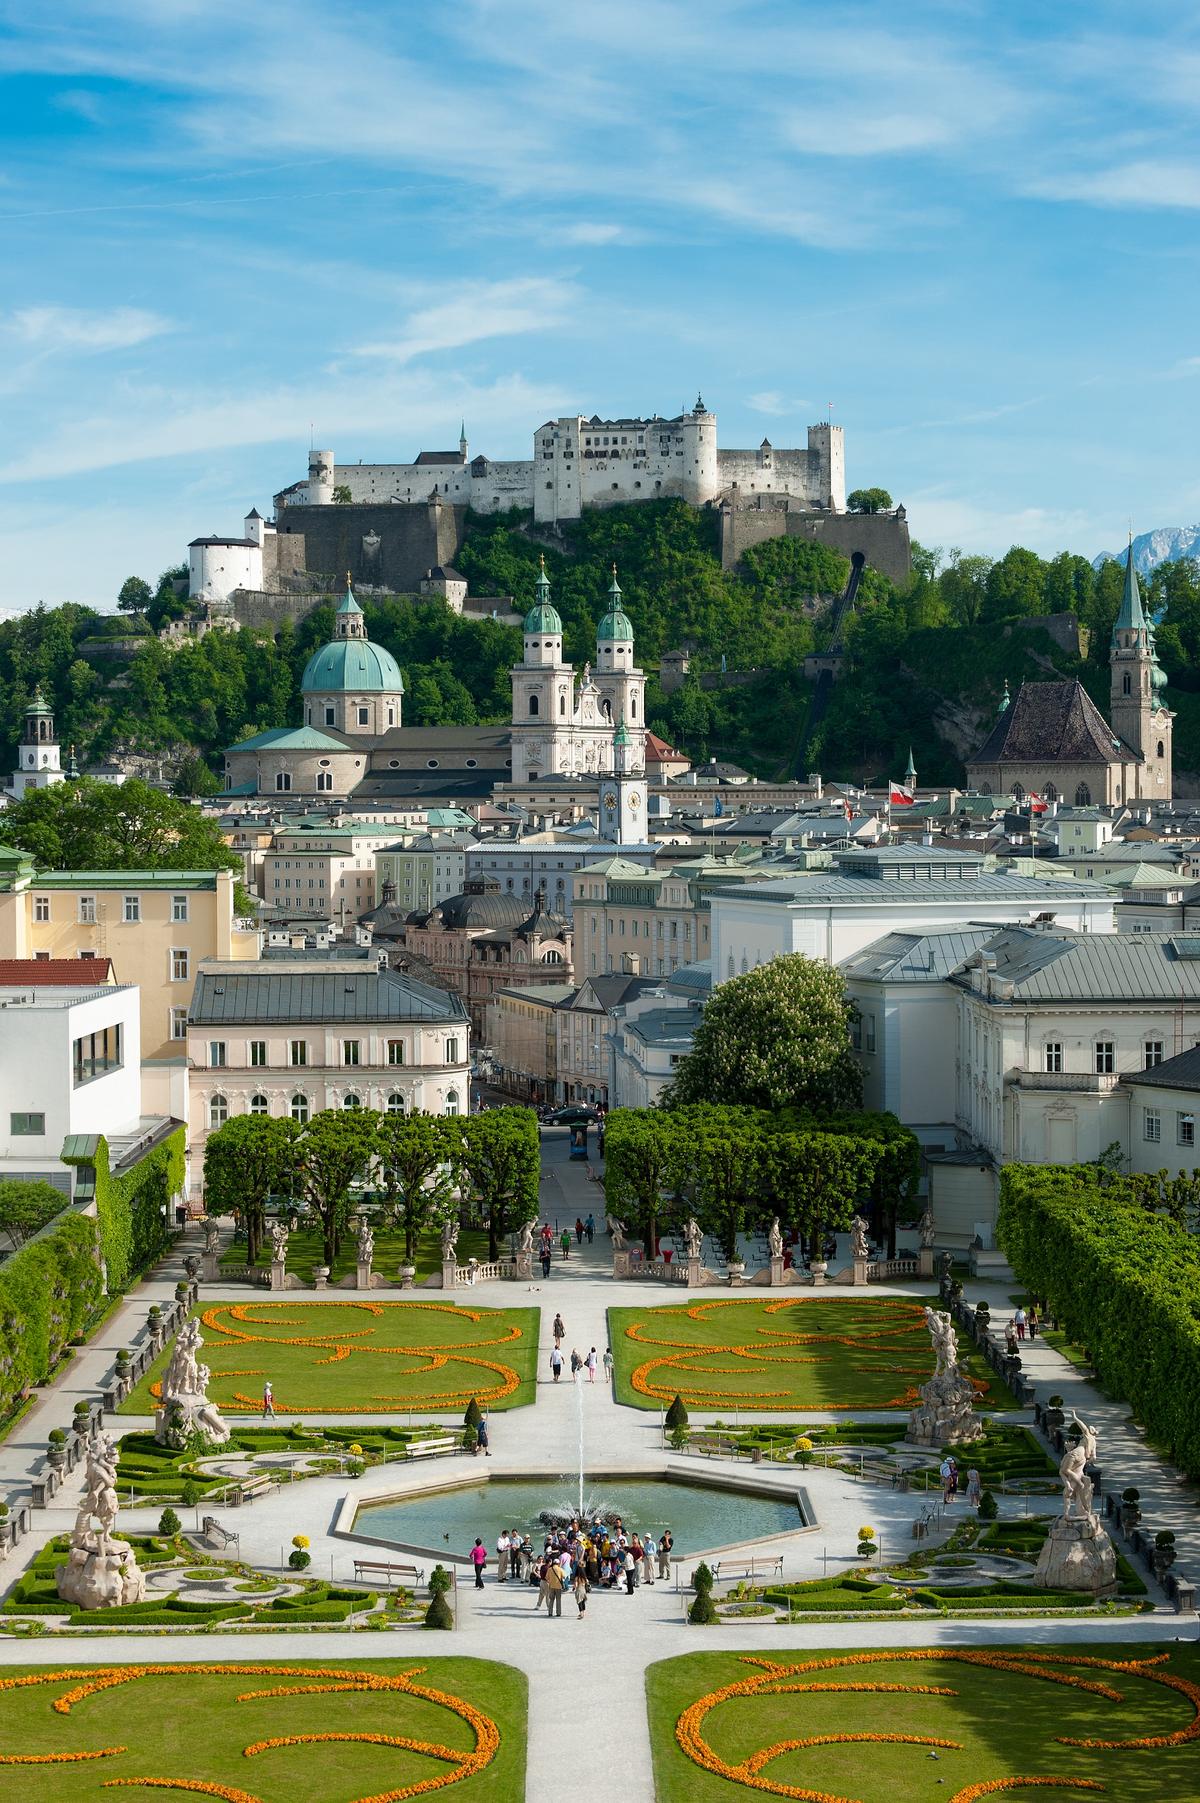 Mirabell Gardens, where "The Sound of Music" was partly shot, with Fortress Hohensalzburg in the background. (SalzburgerLand Tourism)